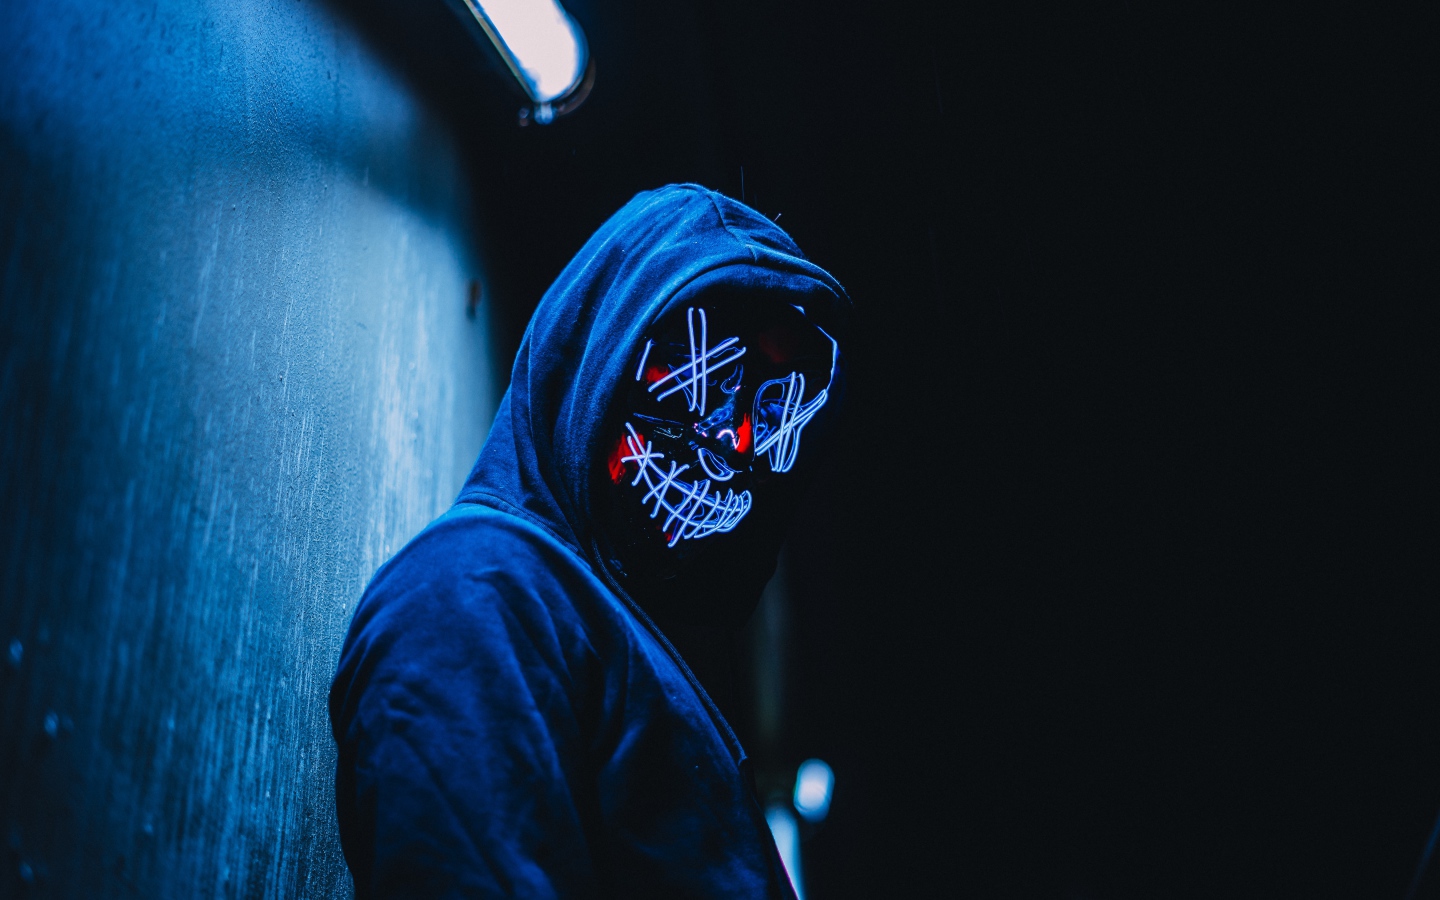 Guy in hoodie with facial mask